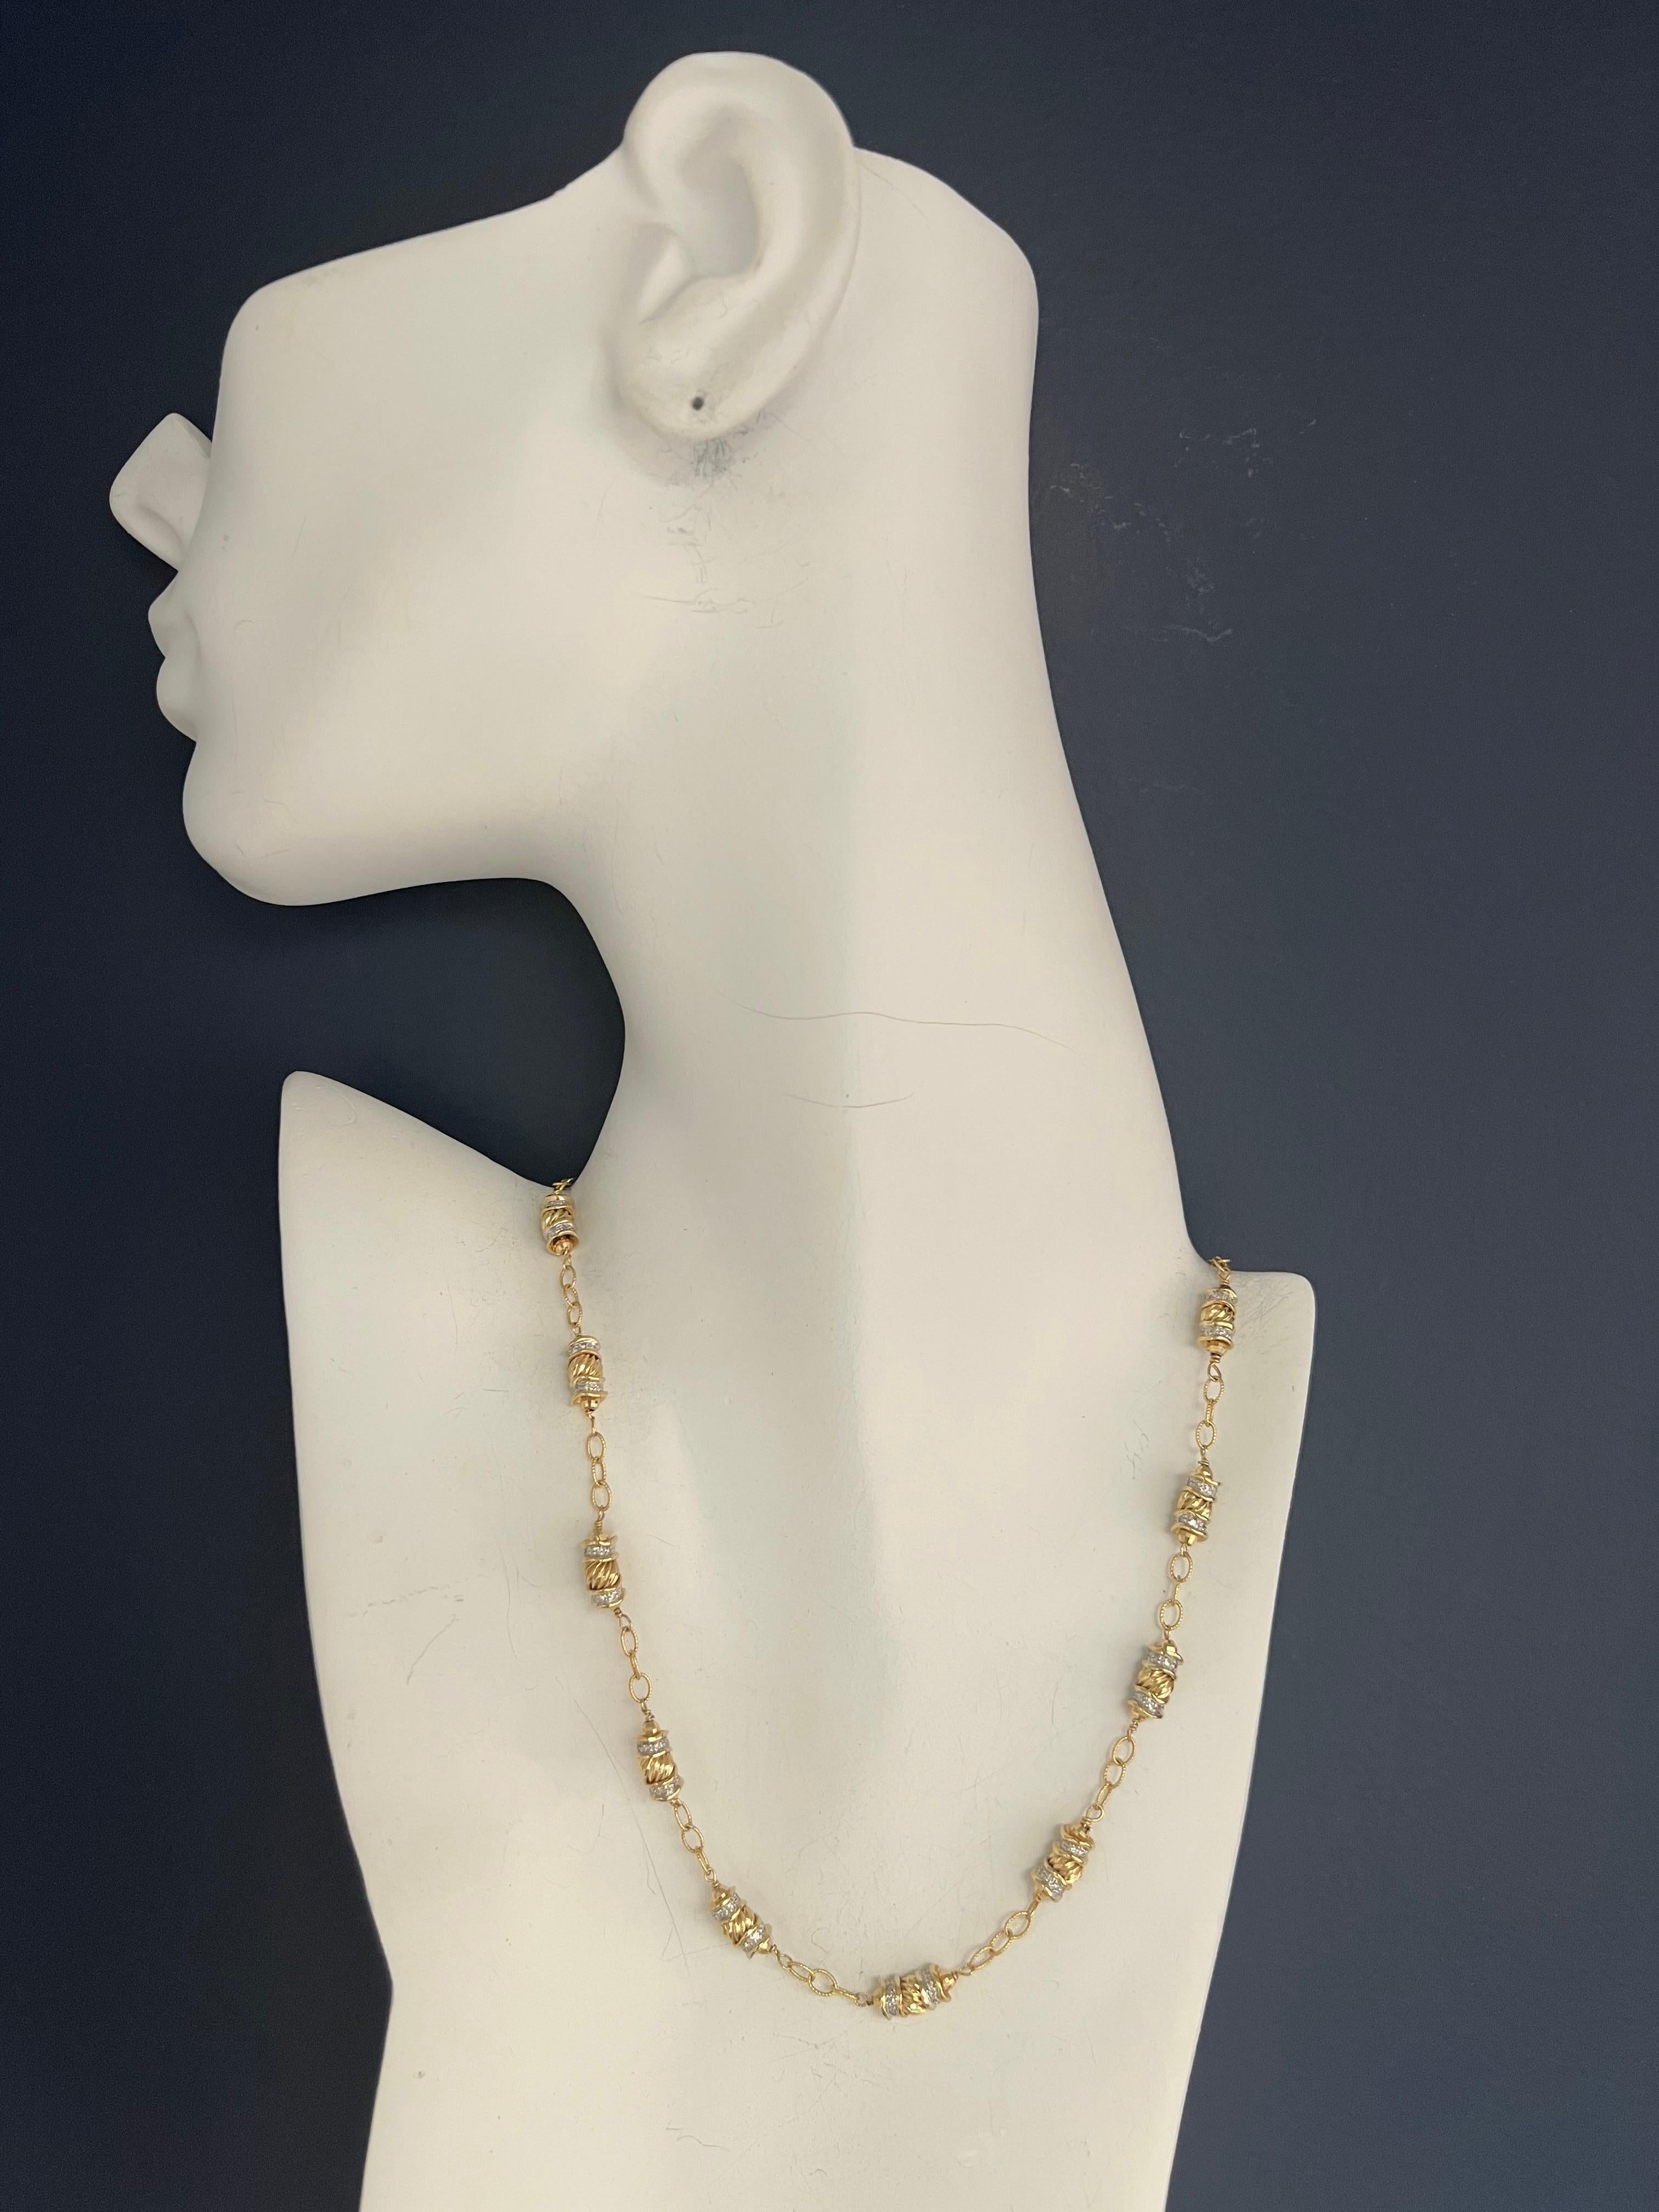 Retro Gold 1 carat natural single cut near colorless diamond necklace circa 1980

A magnificent 14k yellow gold natural single cut diamond necklace set with approximately 262 g color (near colorless) diamonds with a clarity grade ranging in si-vvs.